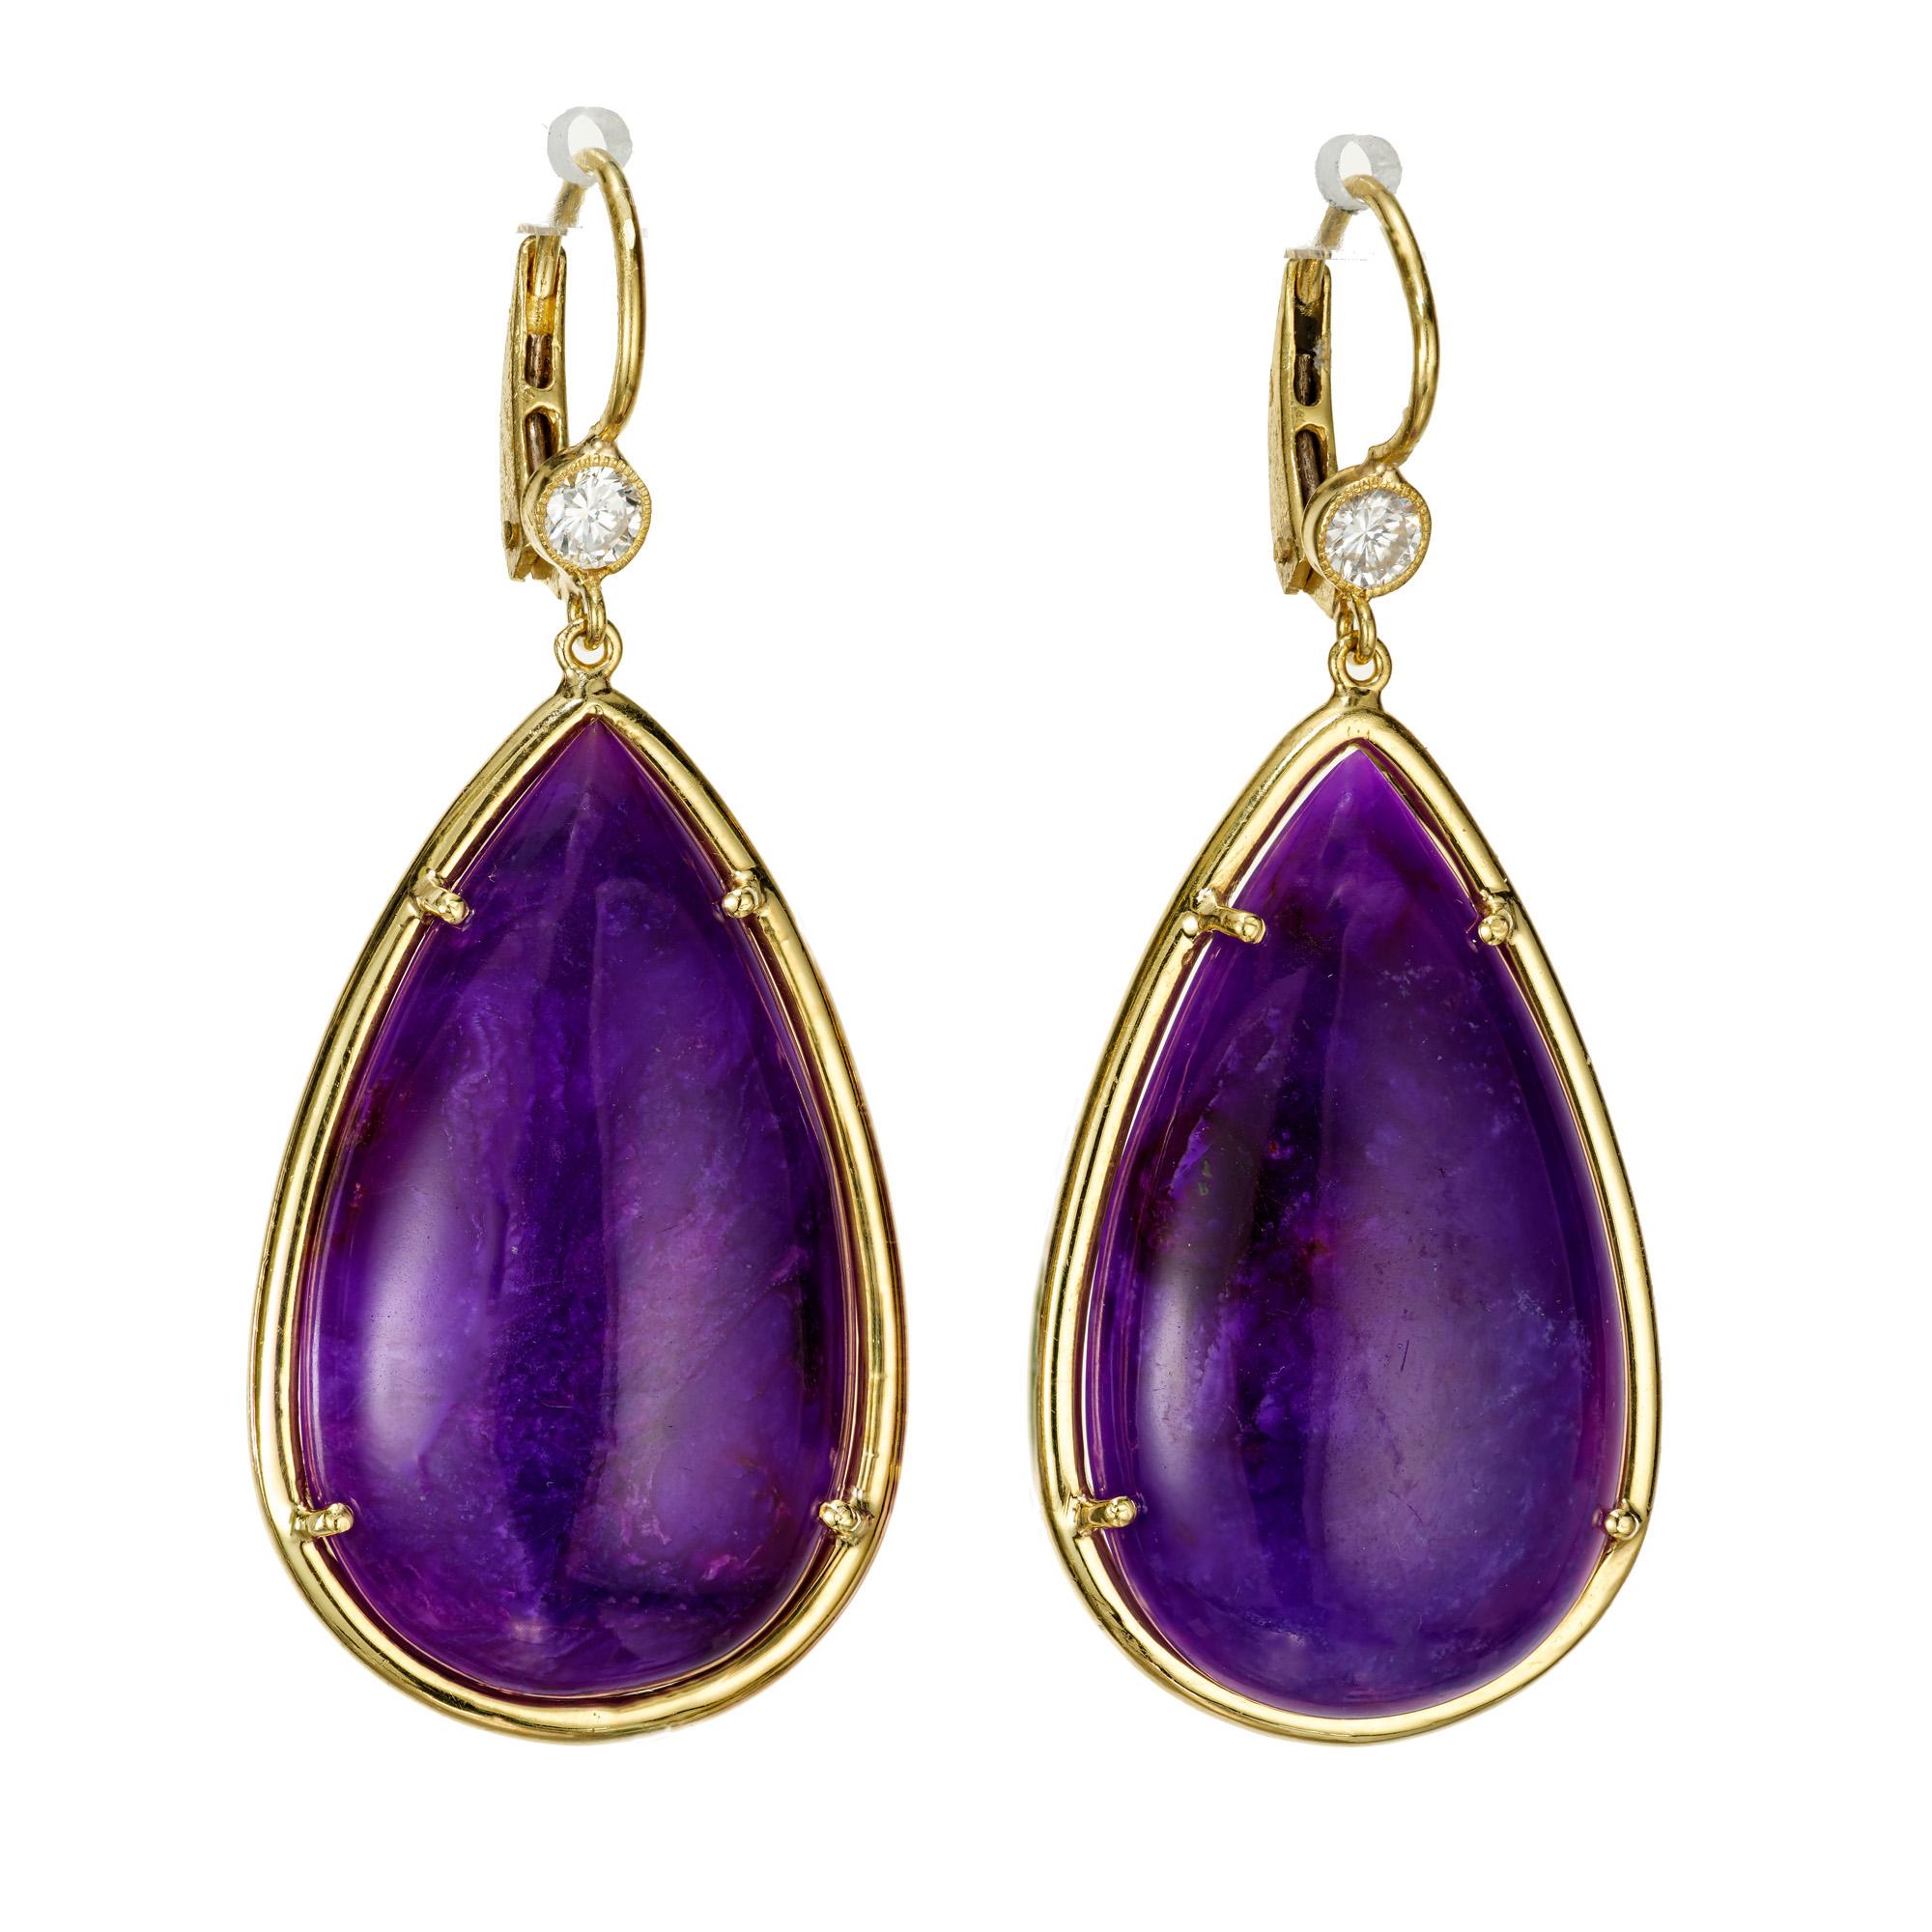 Designer John Apel large bright purple sugalite and diamond earrings. 2 pear shaped bluish purple sugalites set in 20k yellow gold with 2 round accent diamonds.  

2 pear shape bluish purple cabochon sugalite, 30.5mm x 17.75mm x 6.1mm
2 round